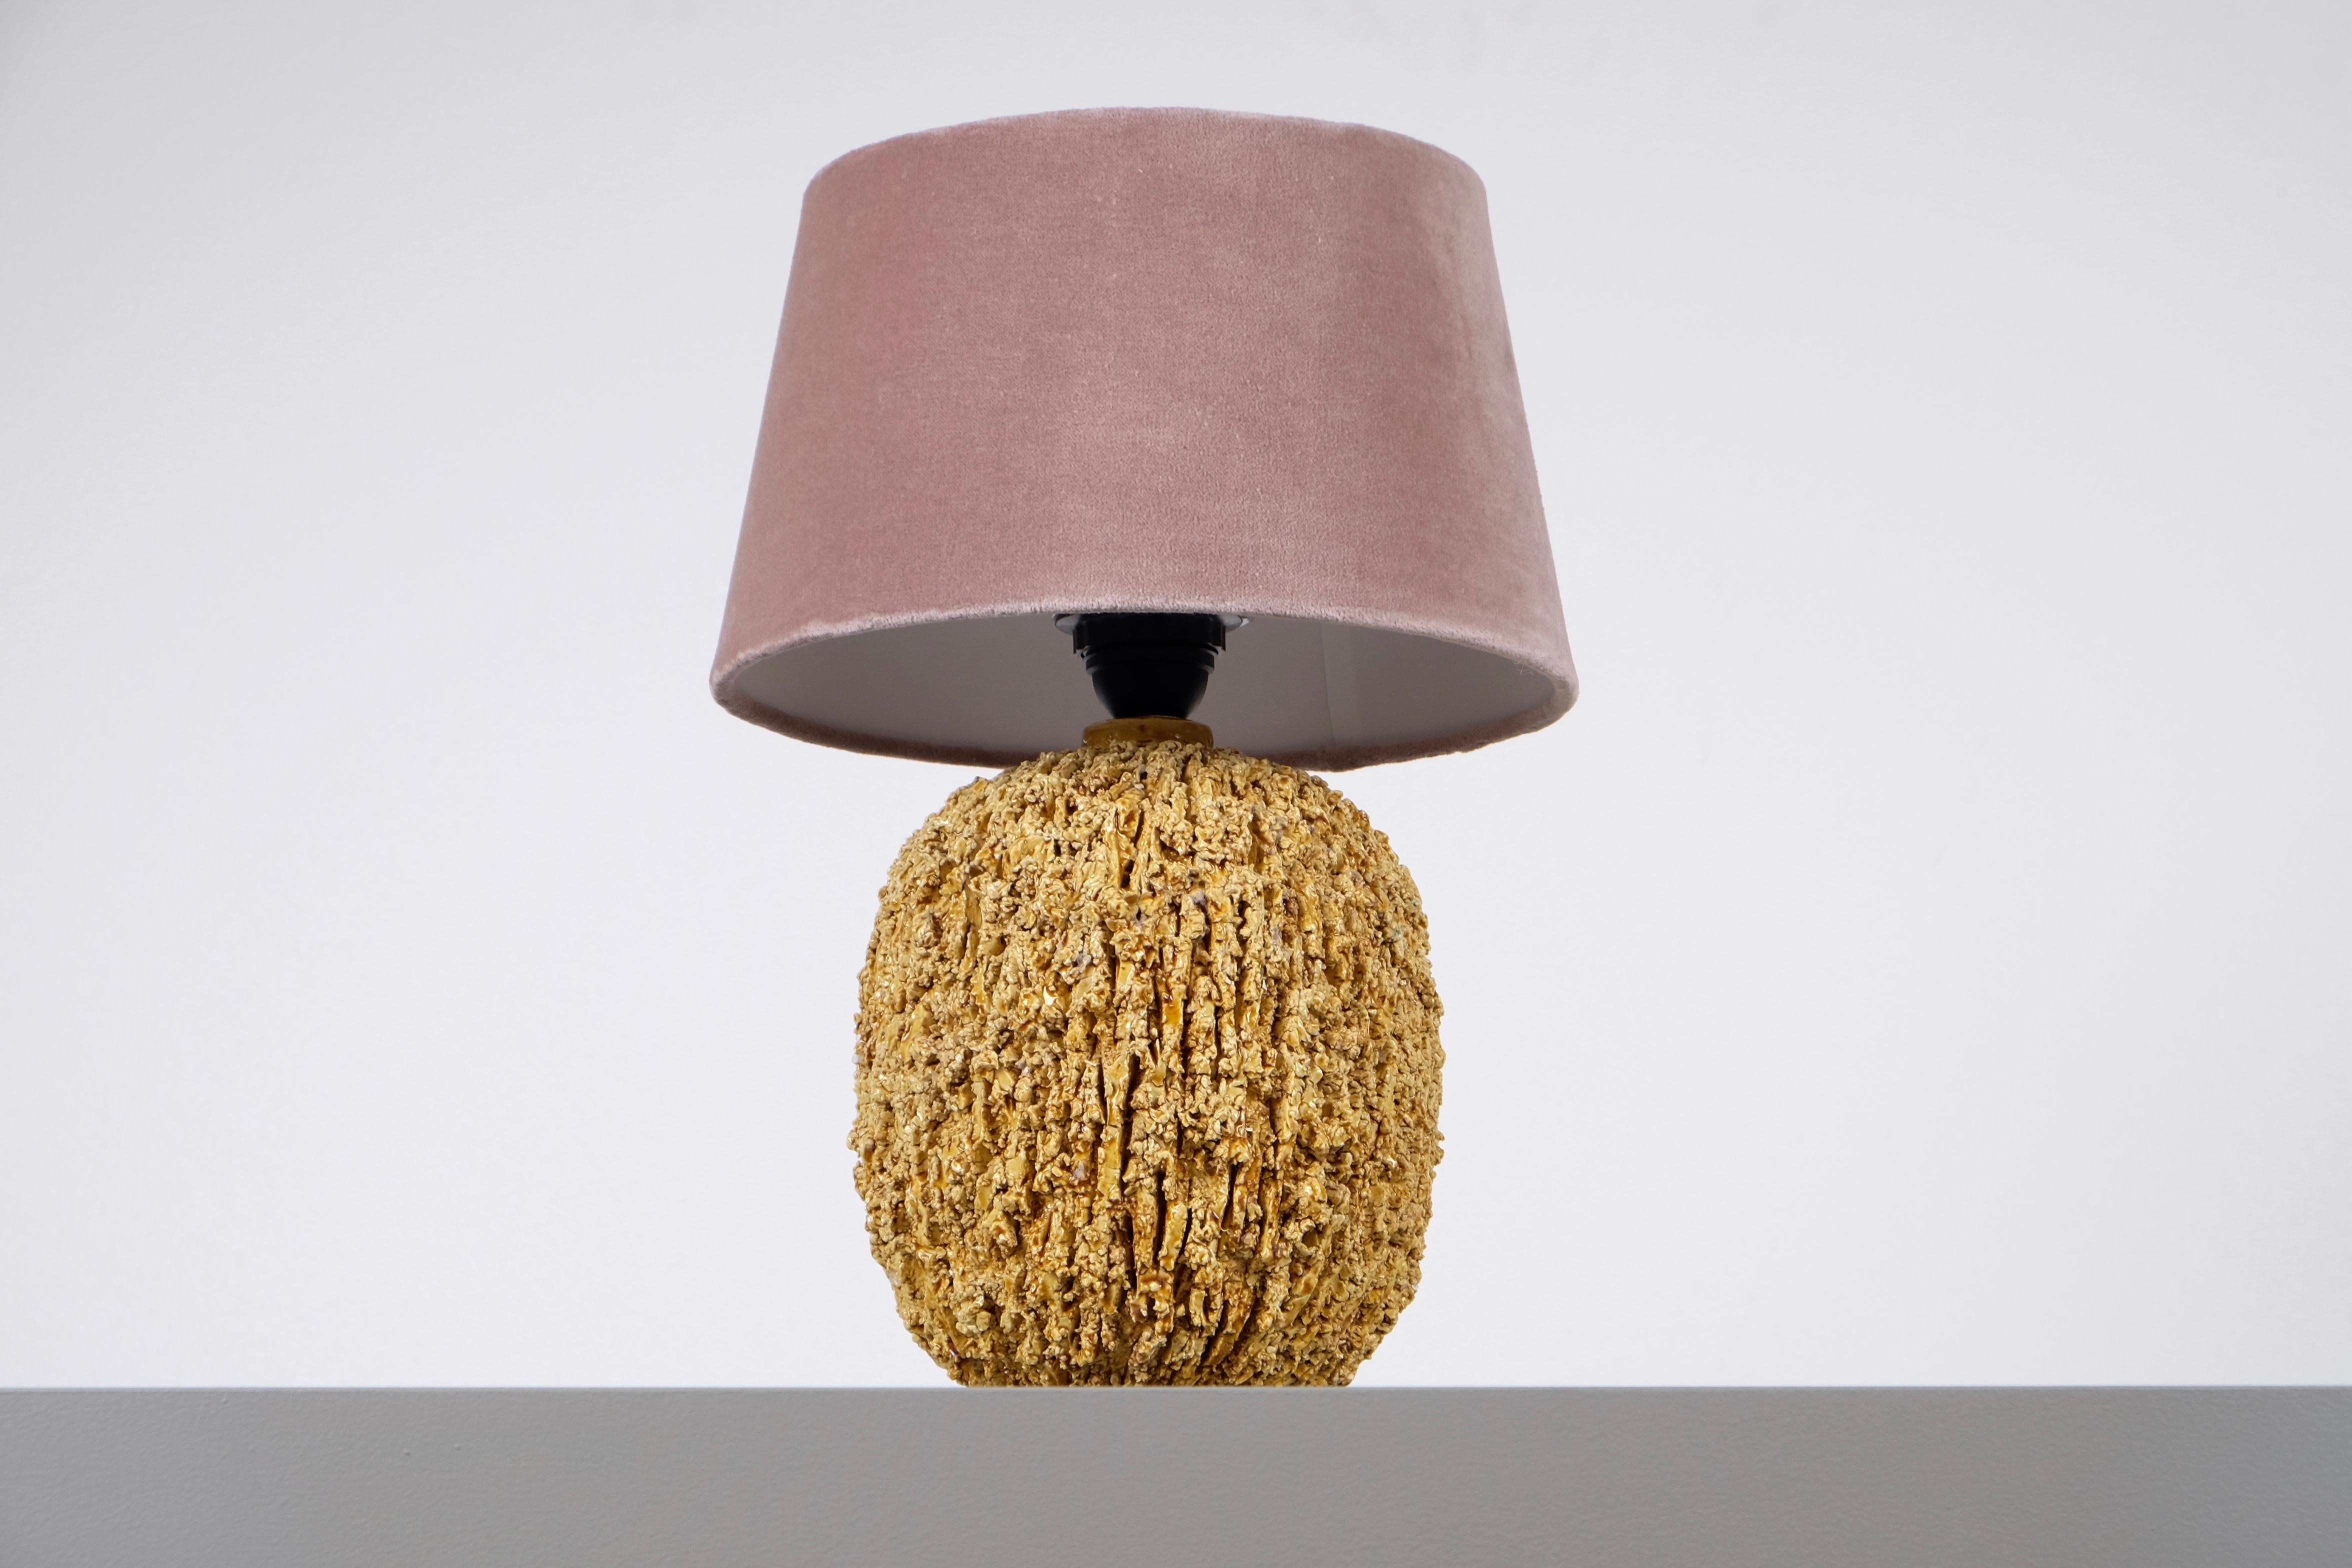 Ceramic lamp in bulbous shape by Gunnar Nylund, composed of chamotte clay and glazed with a gold colored luster glaze. Produced by Rörstrand.
Stamped. Measures: Height including shade 37 cm. New wiring.